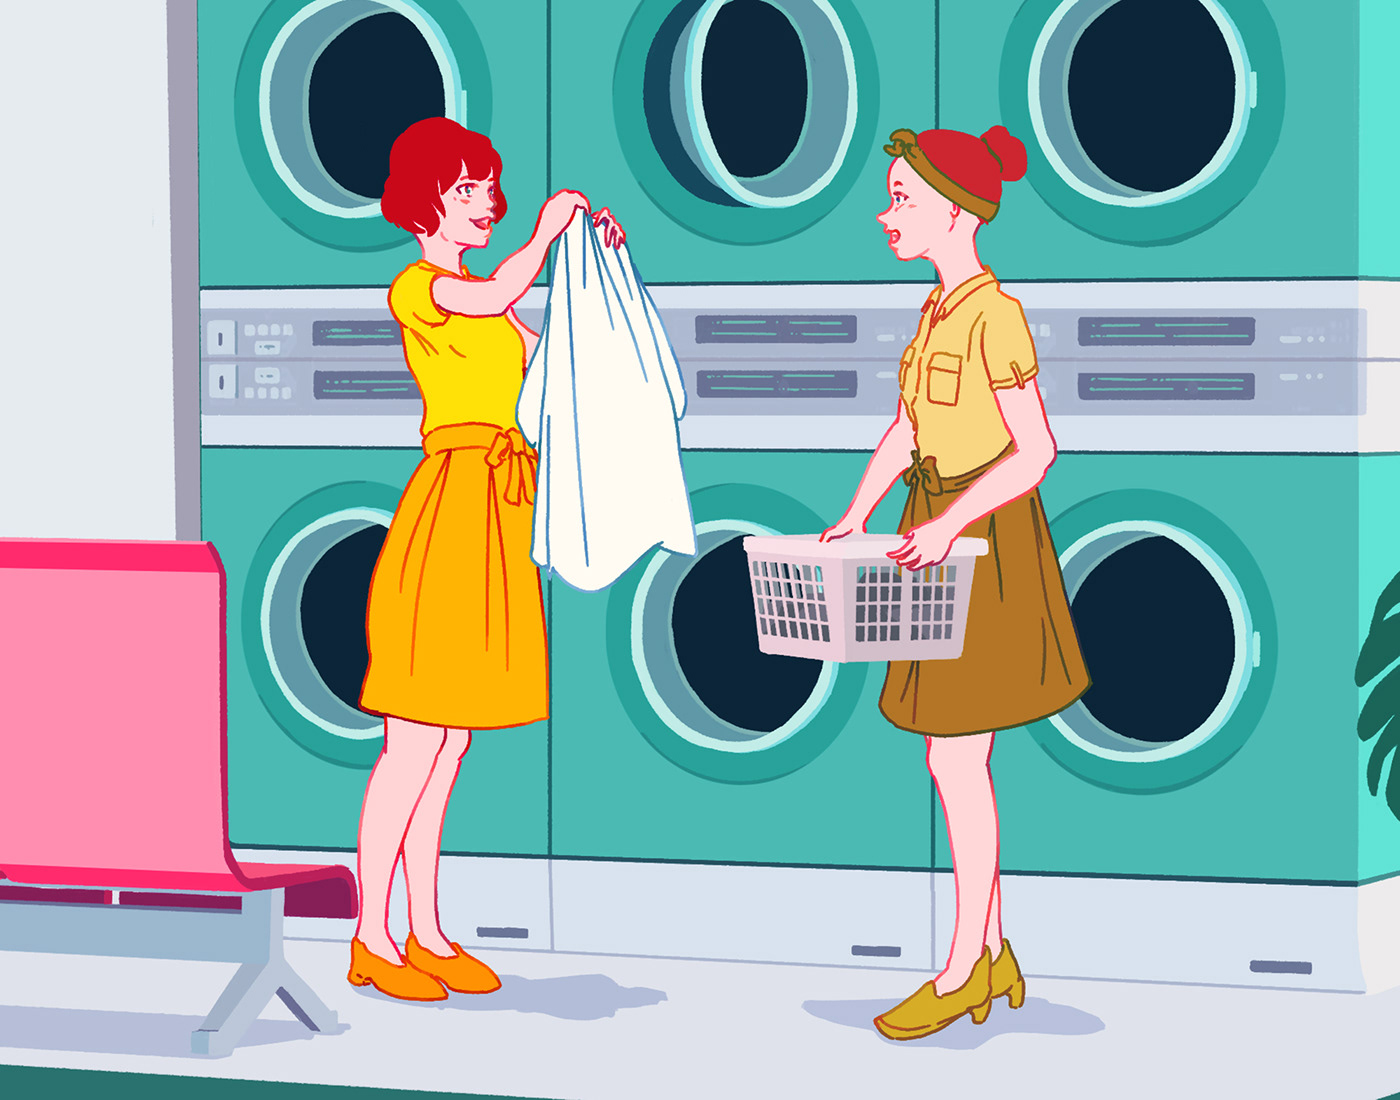 Illustration of two women washing clothes in a laundromat